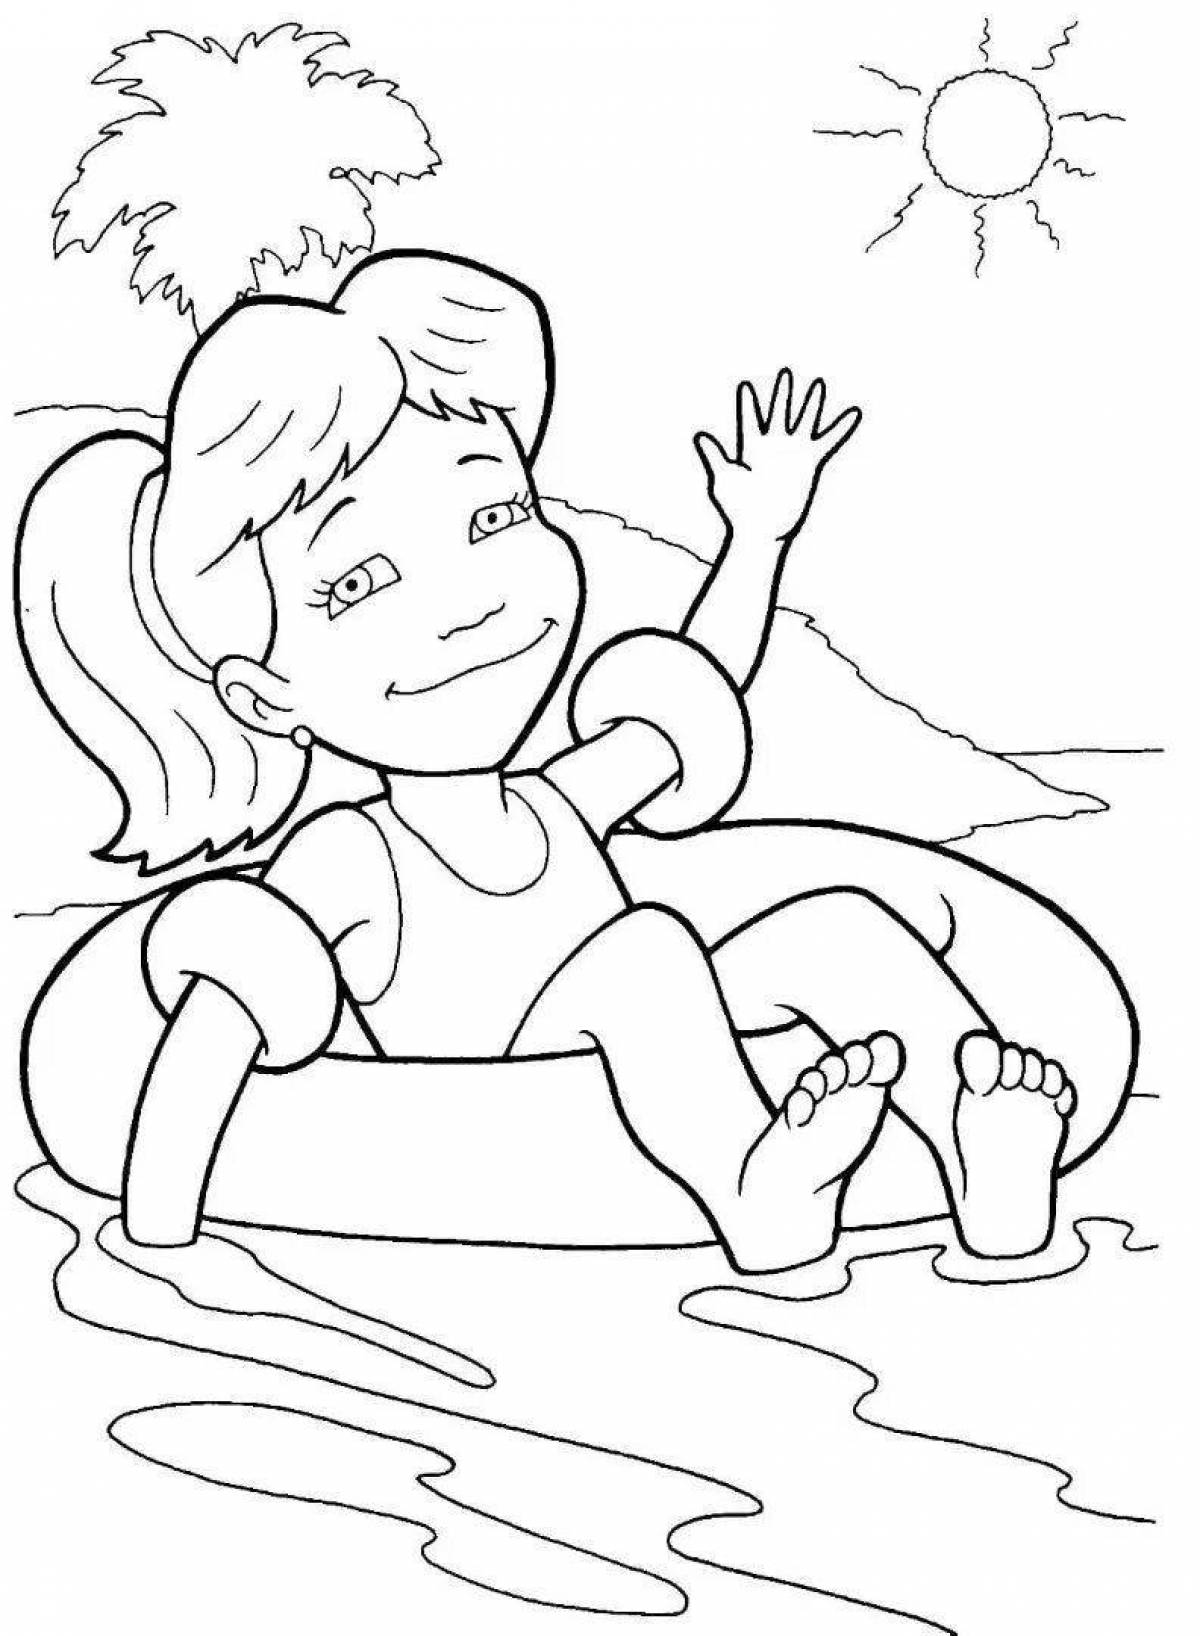 Attractive water safety coloring page